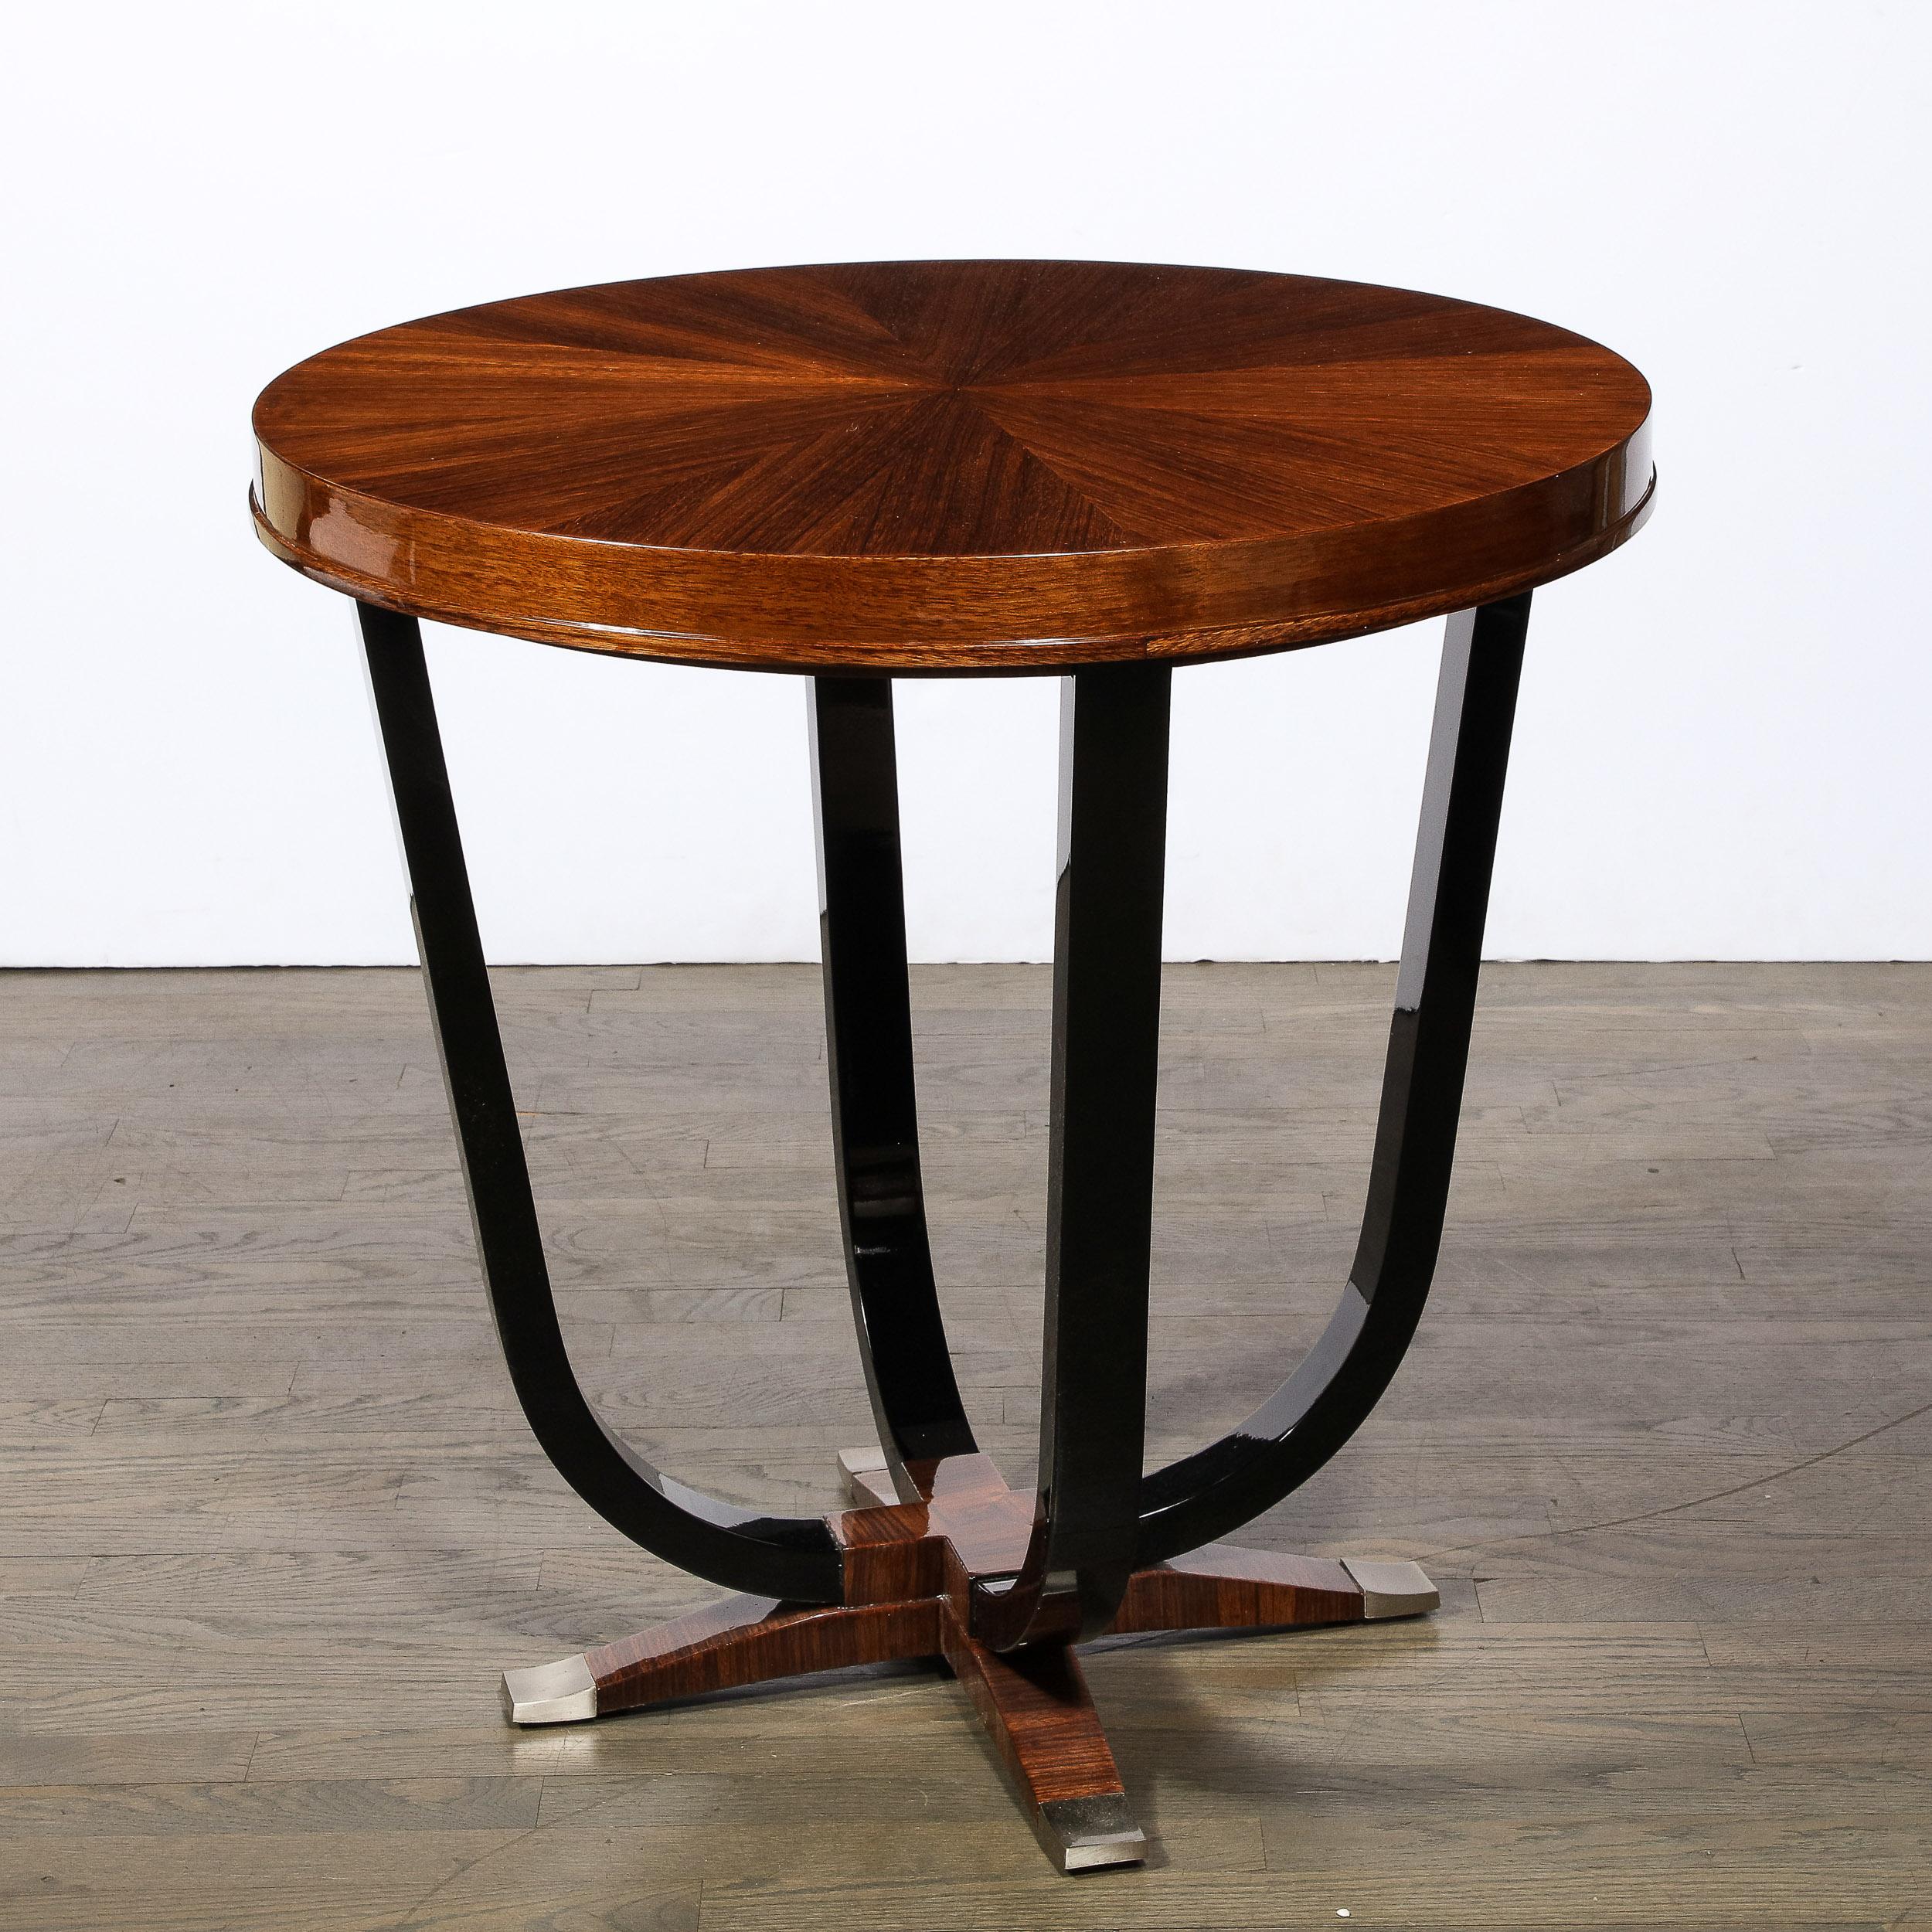 This stunning Art Deco Gueridon table was realized in France circa 1935. It features a four-pointed base in bookmatched walnut capped on the ends with brushed nickel sabots. Four streamlined supports ascend upwards in black lacquer where they